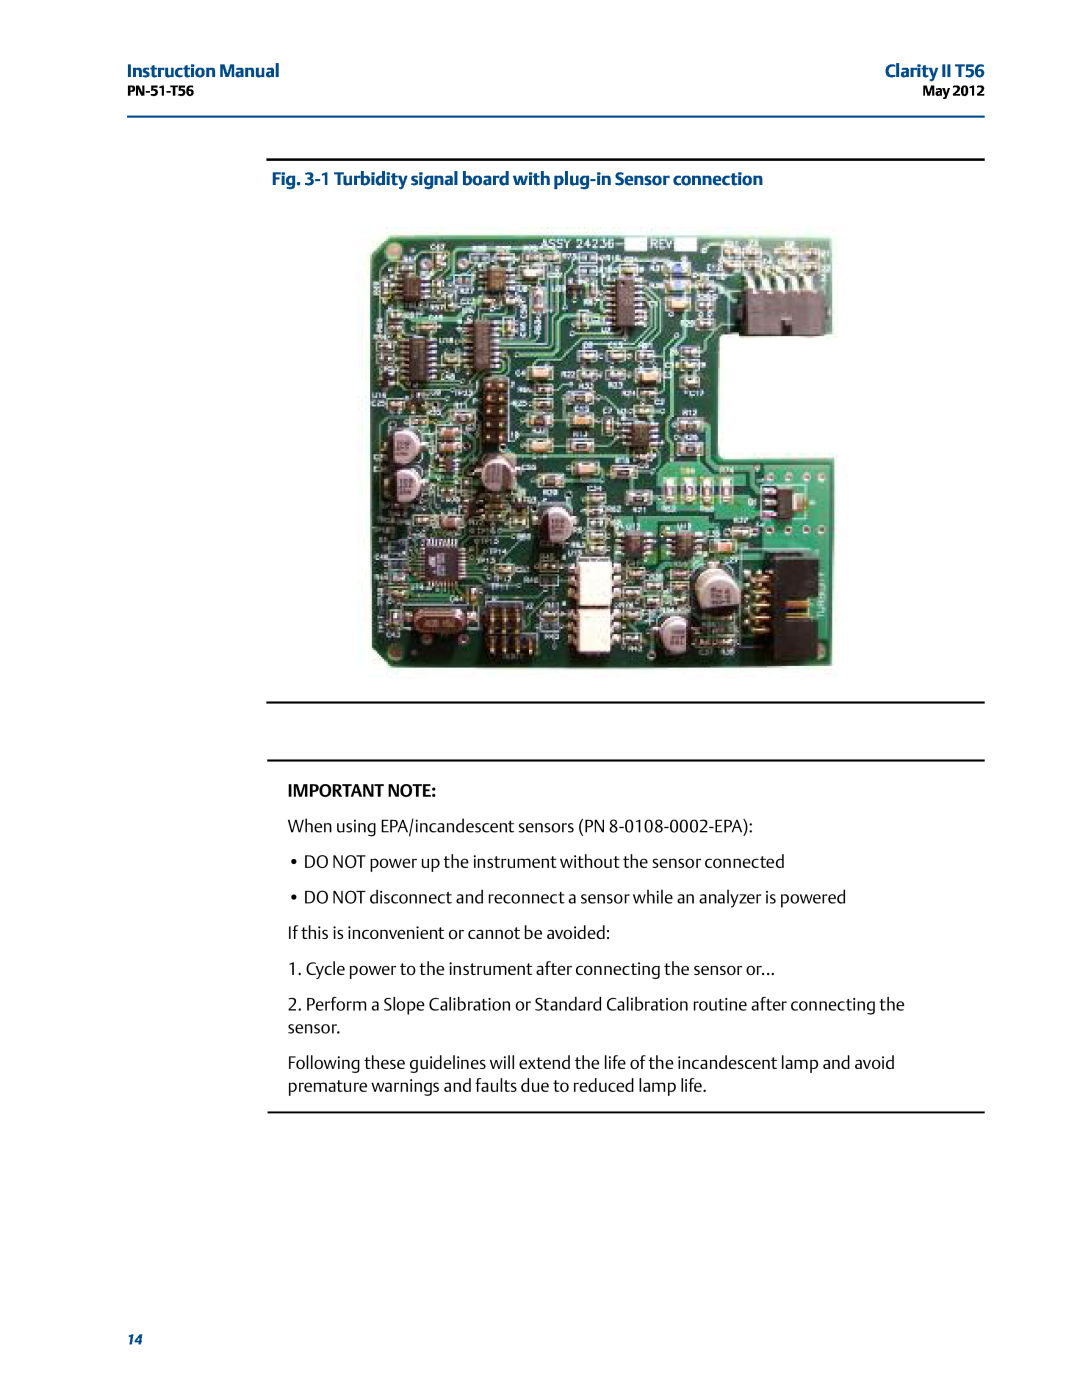 Emerson PN-51-T56 instruction manual 1 Turbidity signal board with plug-in Sensor connection, Important Note 